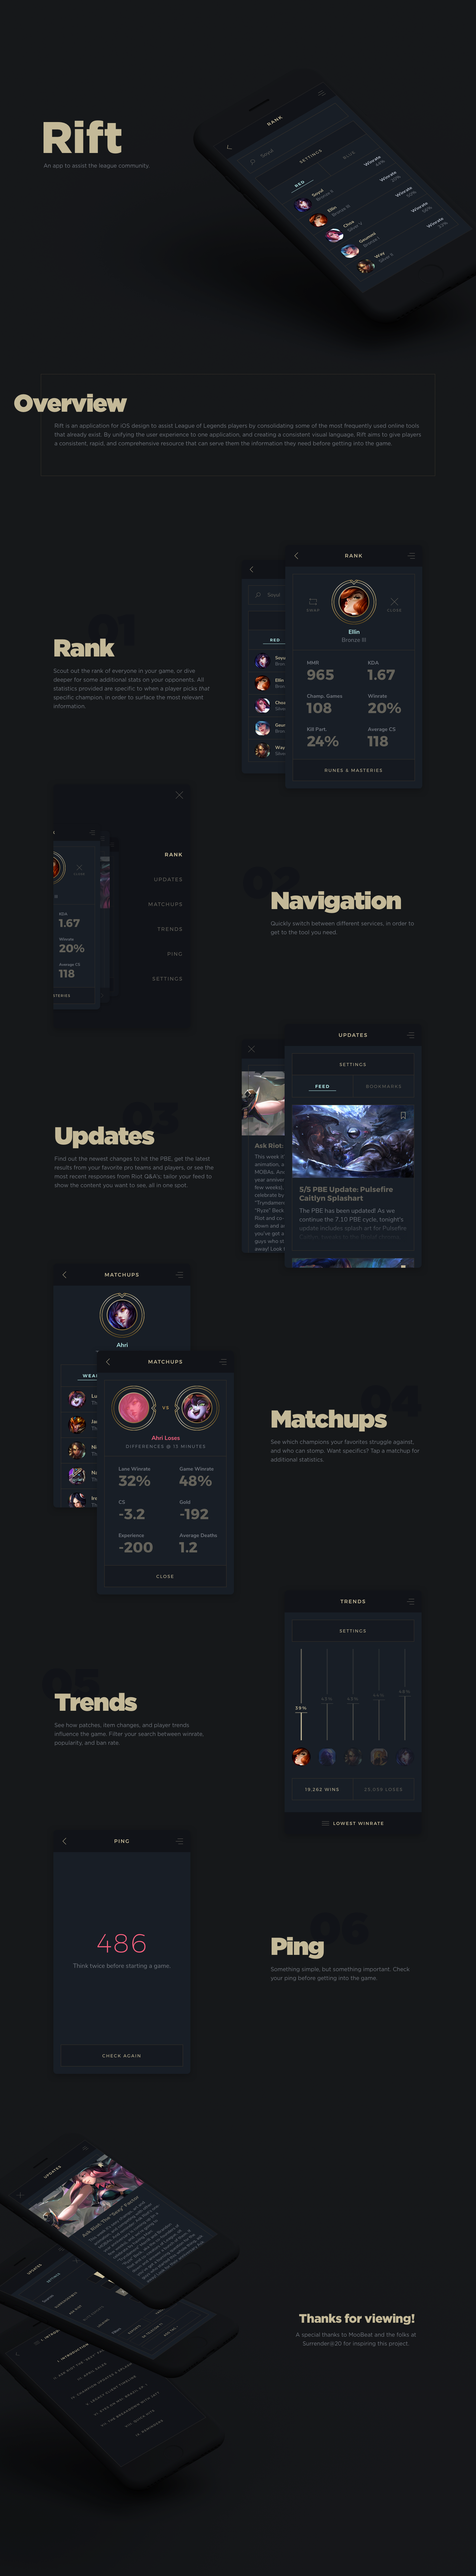 league of legends lol ios product UI ux Mobile app esports Gaming iphone